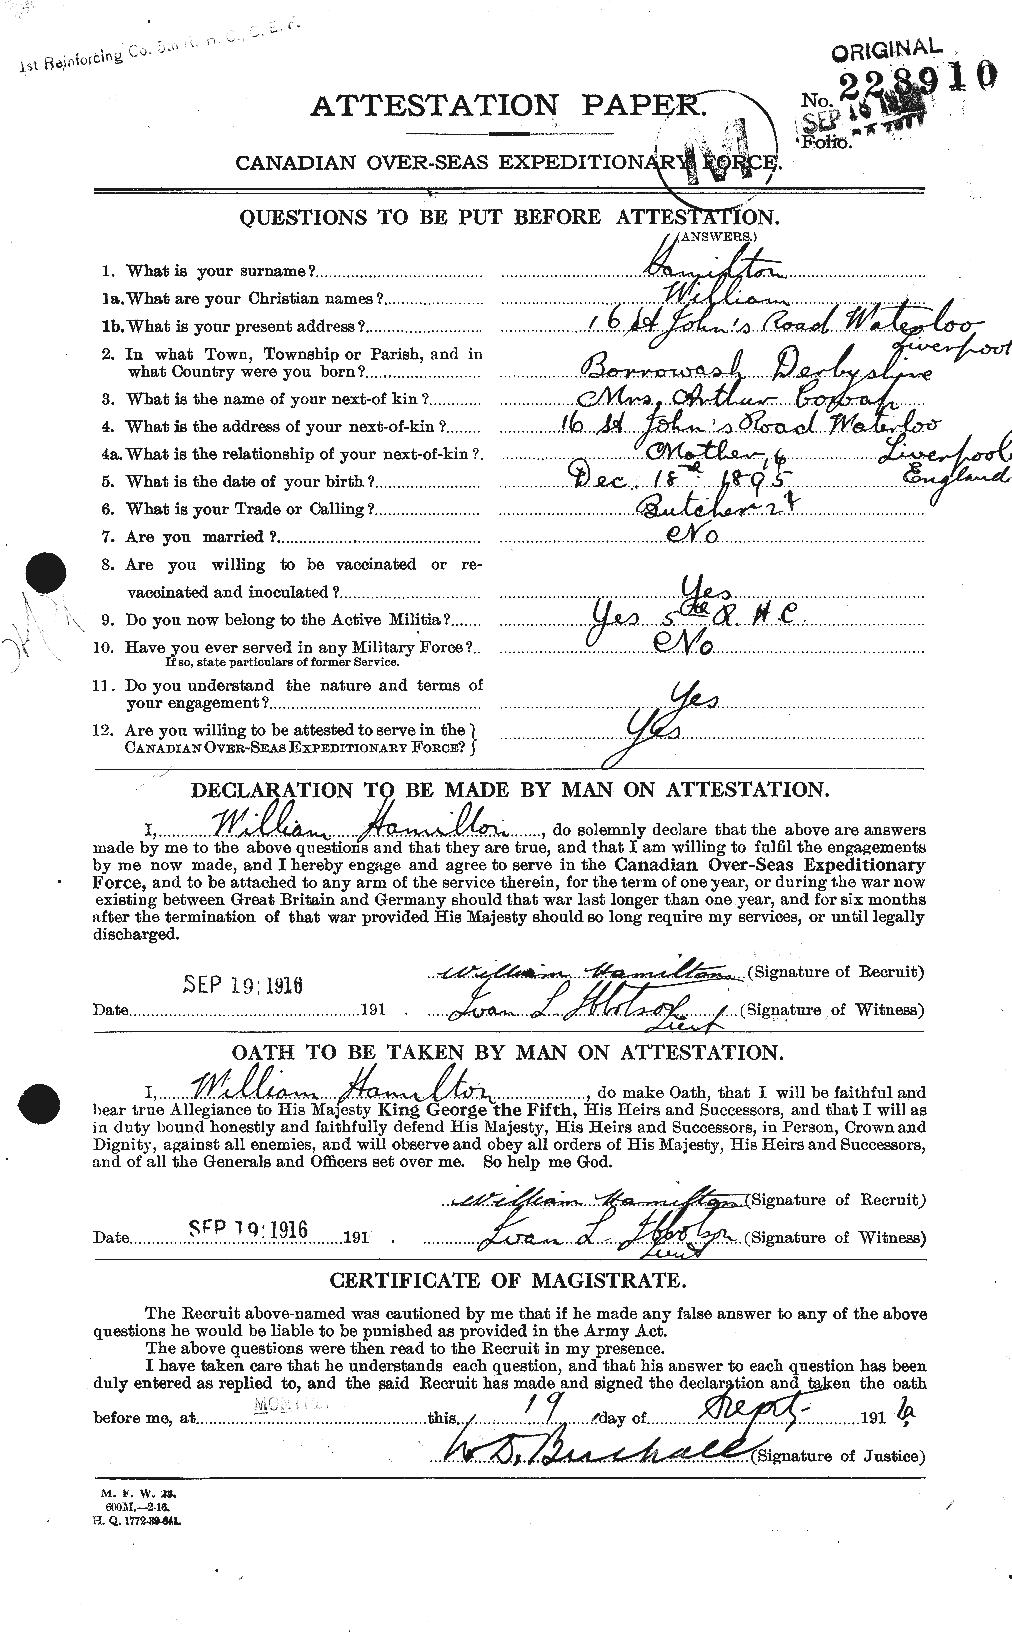 Personnel Records of the First World War - CEF 374849a